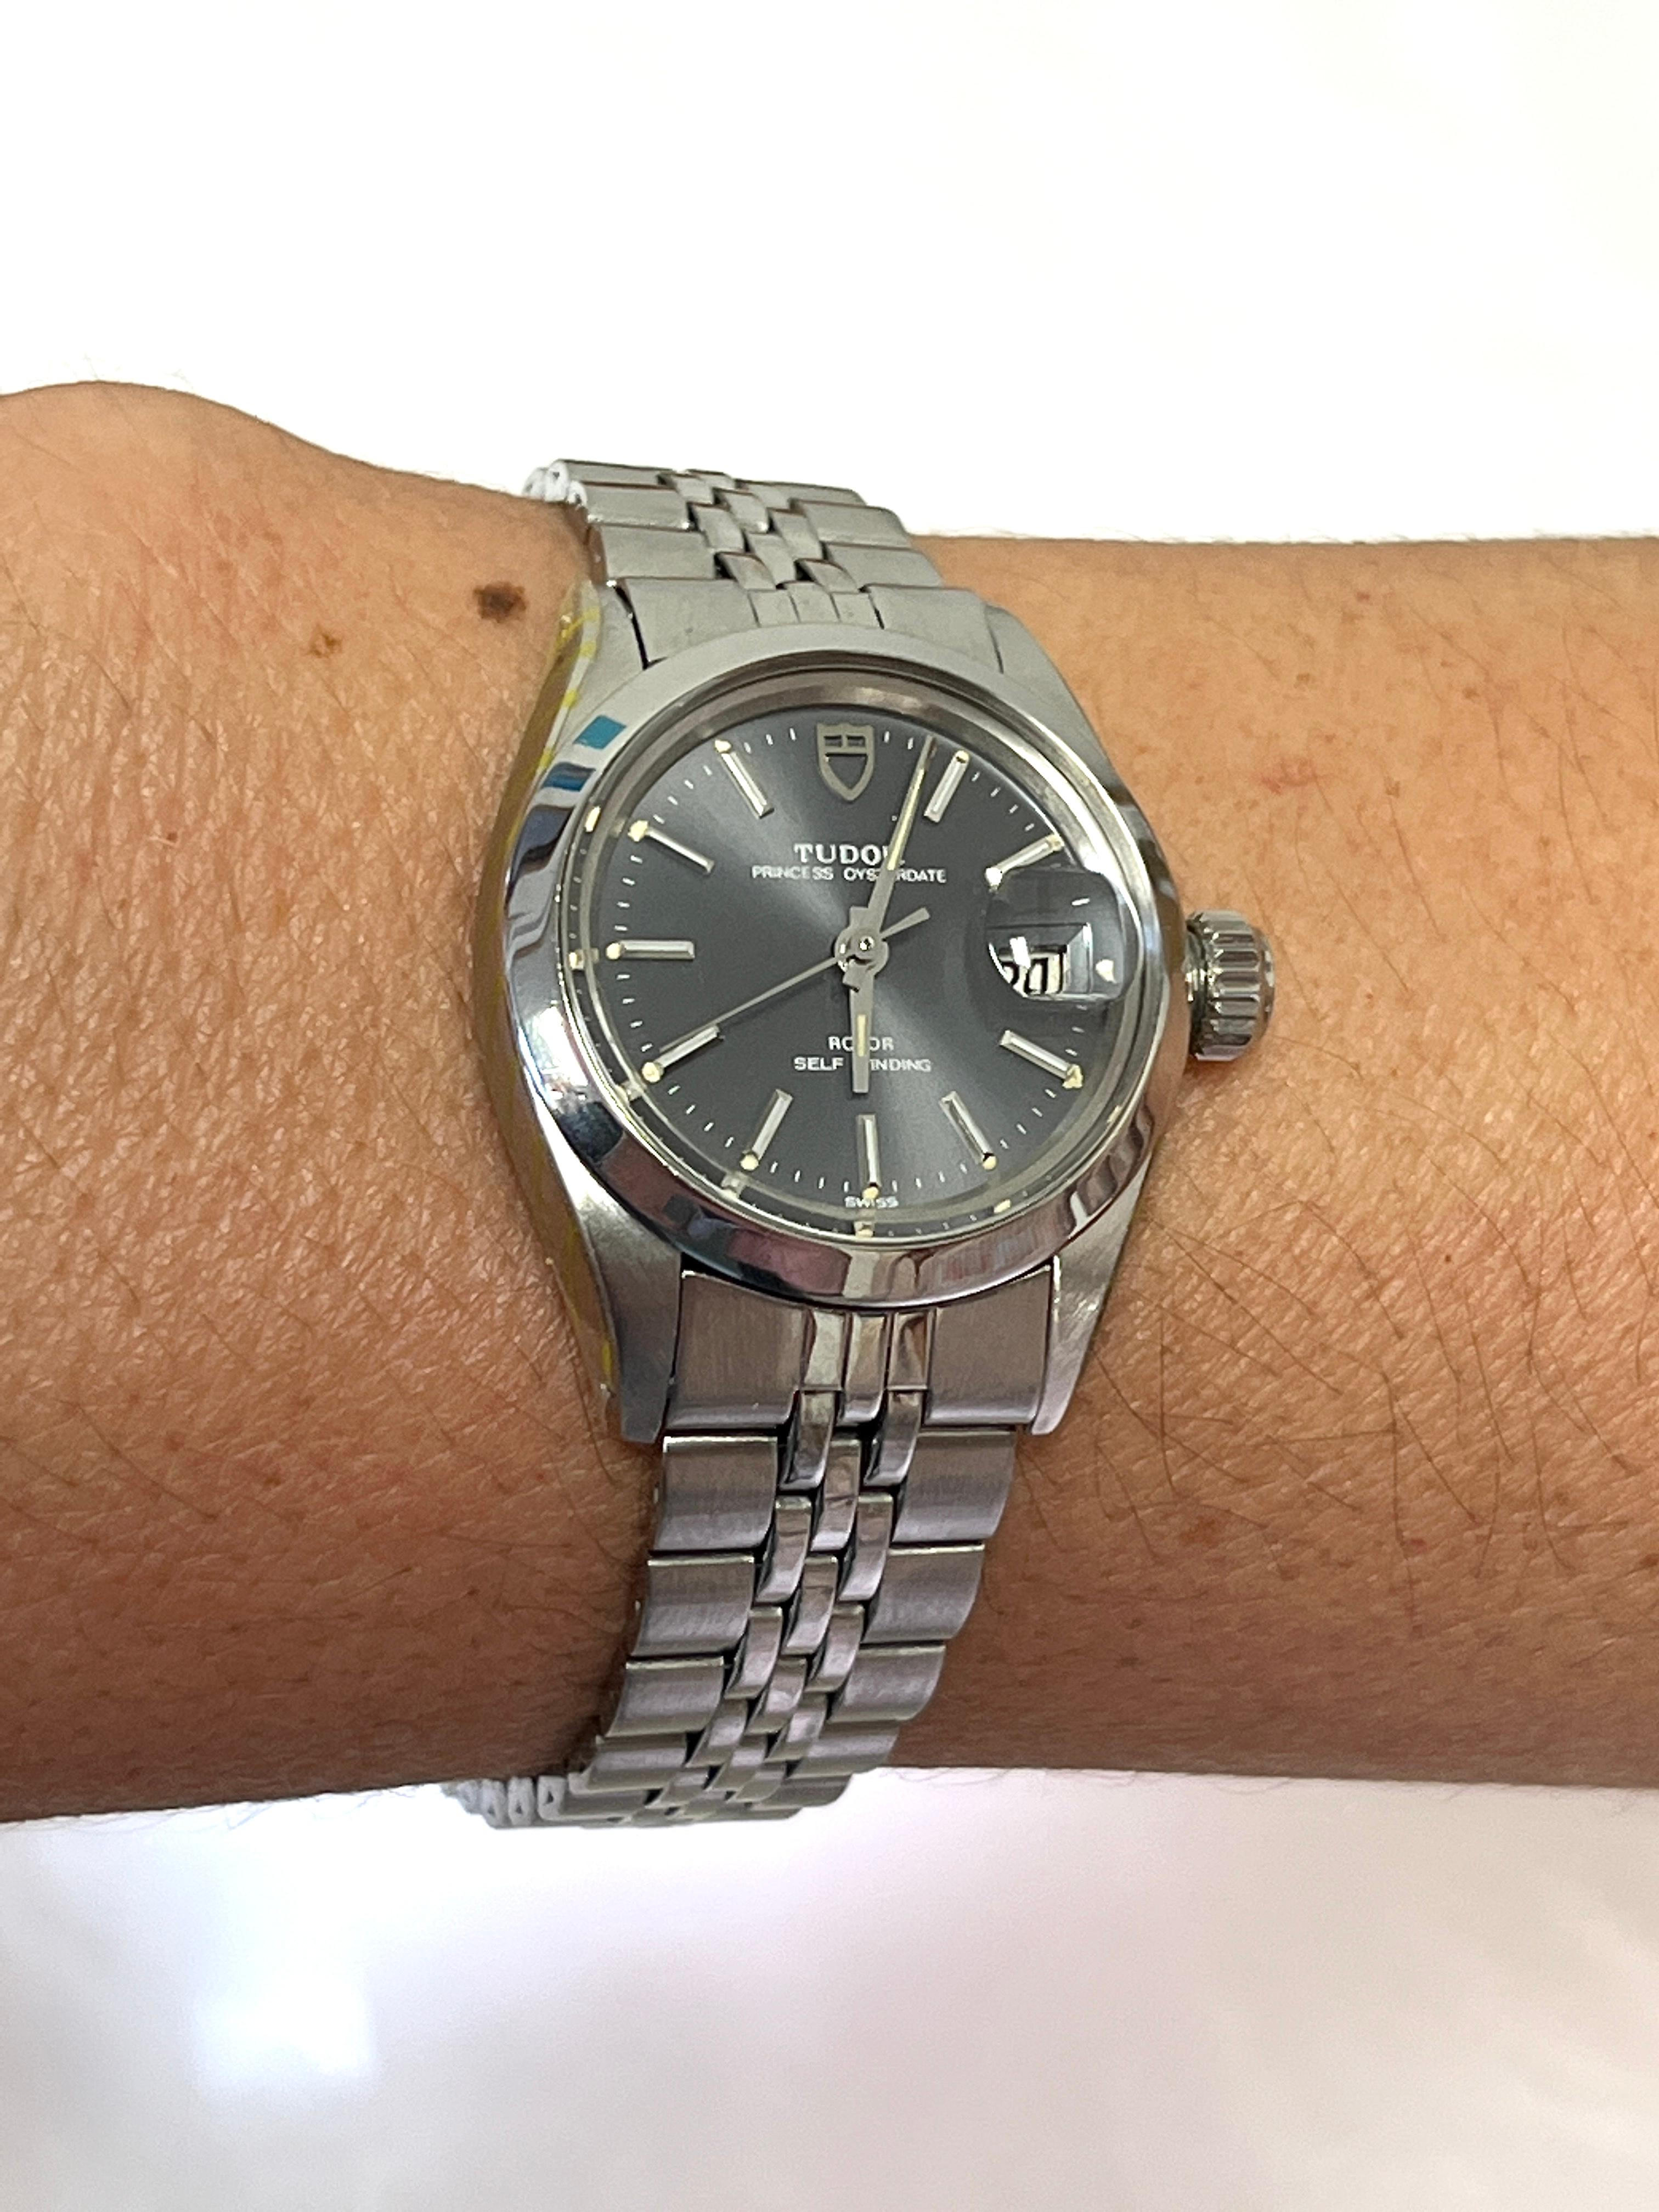 Tudor 25mm Princess OysterDate Self Winding Automatic with Jubilee Bracelet  In Excellent Condition For Sale In Miami, FL